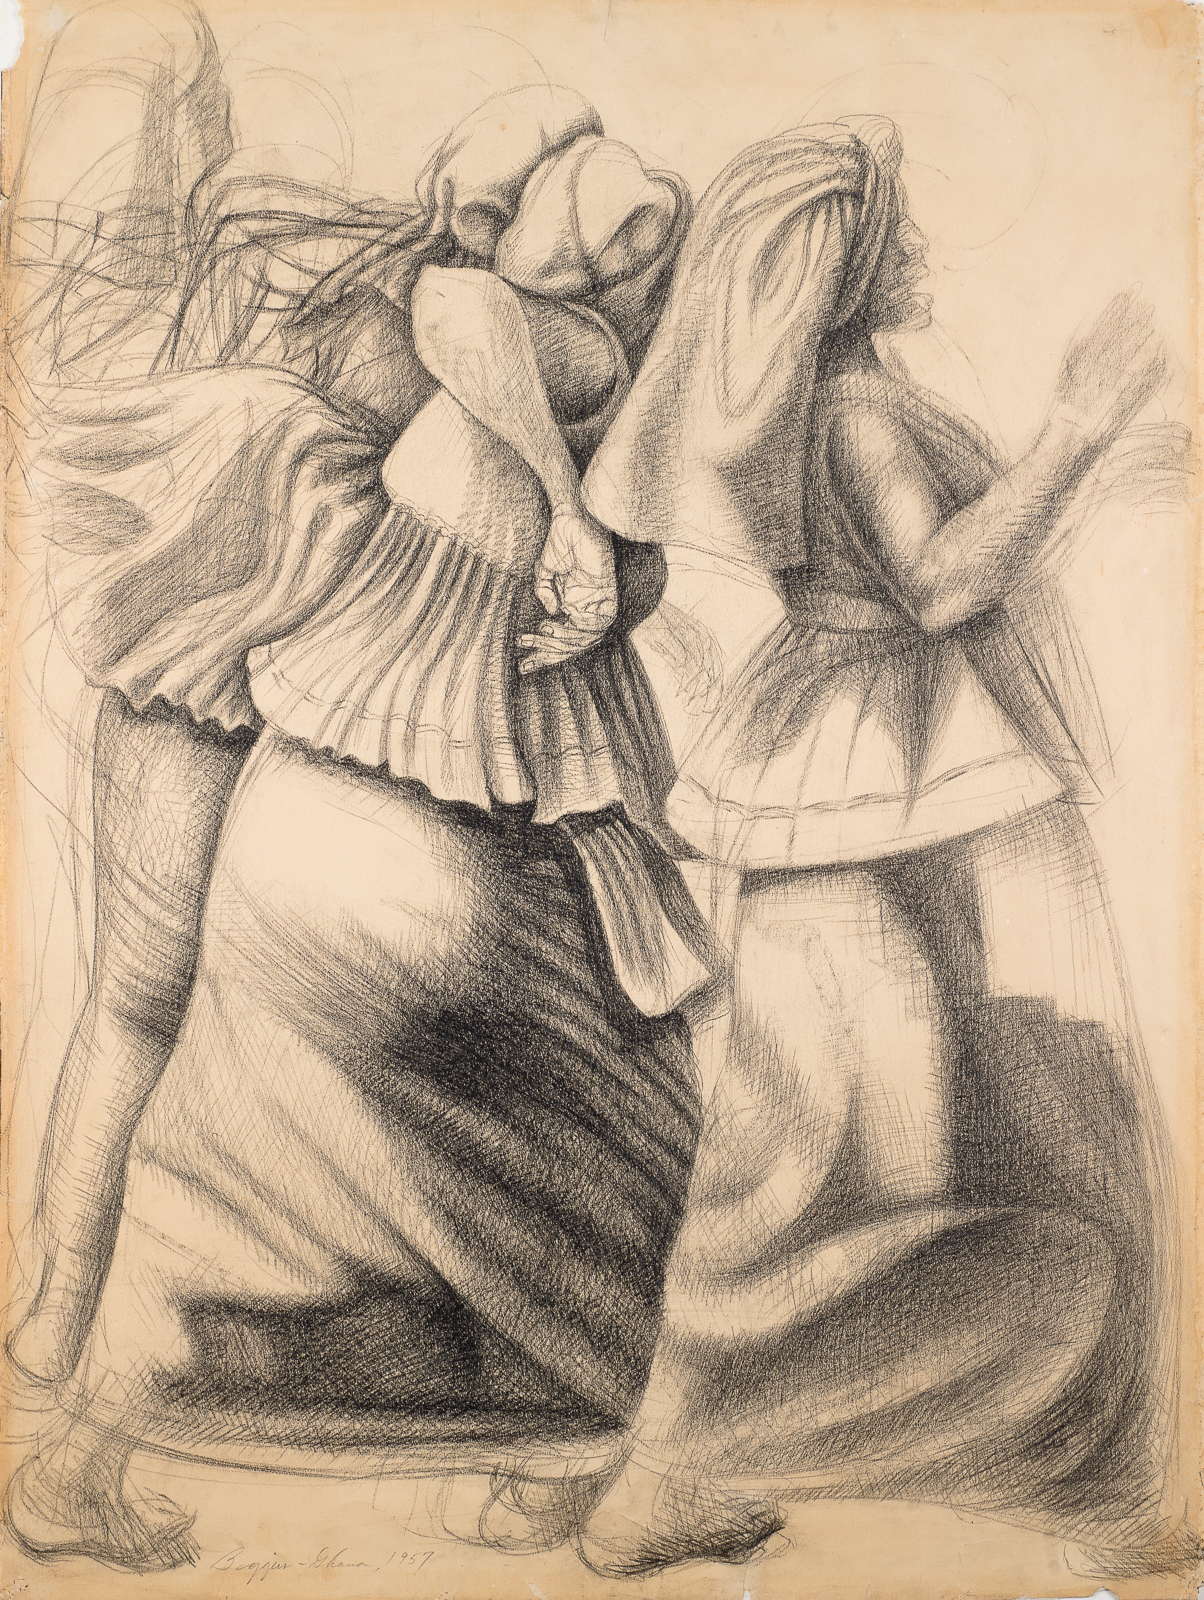 John Biggers, Dancers of the Ghana Harvest Festival, 1957, conté crayon, 39¼ x 29 5/8 inches. Palmer Museum of Art, Purchased in memory of Charles V. Hallman (Class of 1928) with funds provided by a bequest from Mabel P. Hansen, 99.44. © John T. Biggers Estate / Licensed by VAGA at Artists Rights Society (ARS), NY, Estate Represented by Michael Rosenfeld Gallery